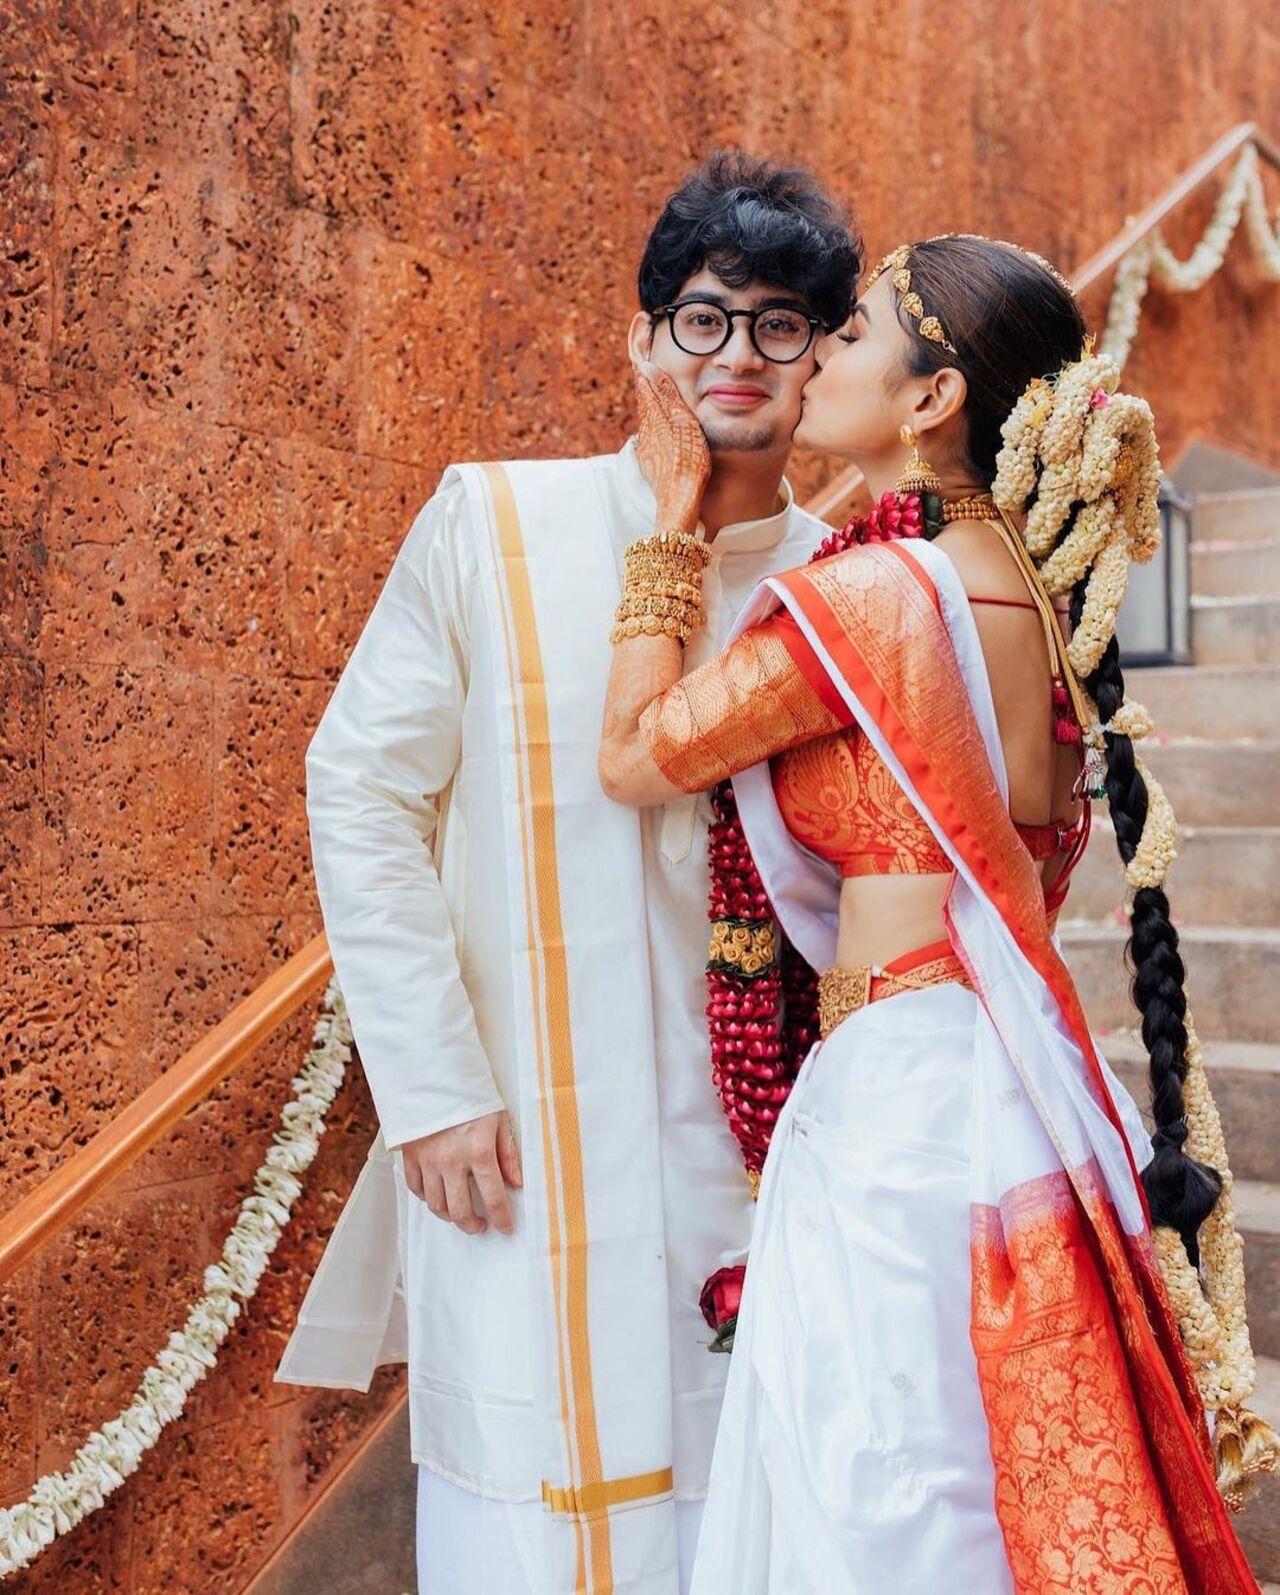 Mouni Roy's elder brother took charge of the rituals along with their mother